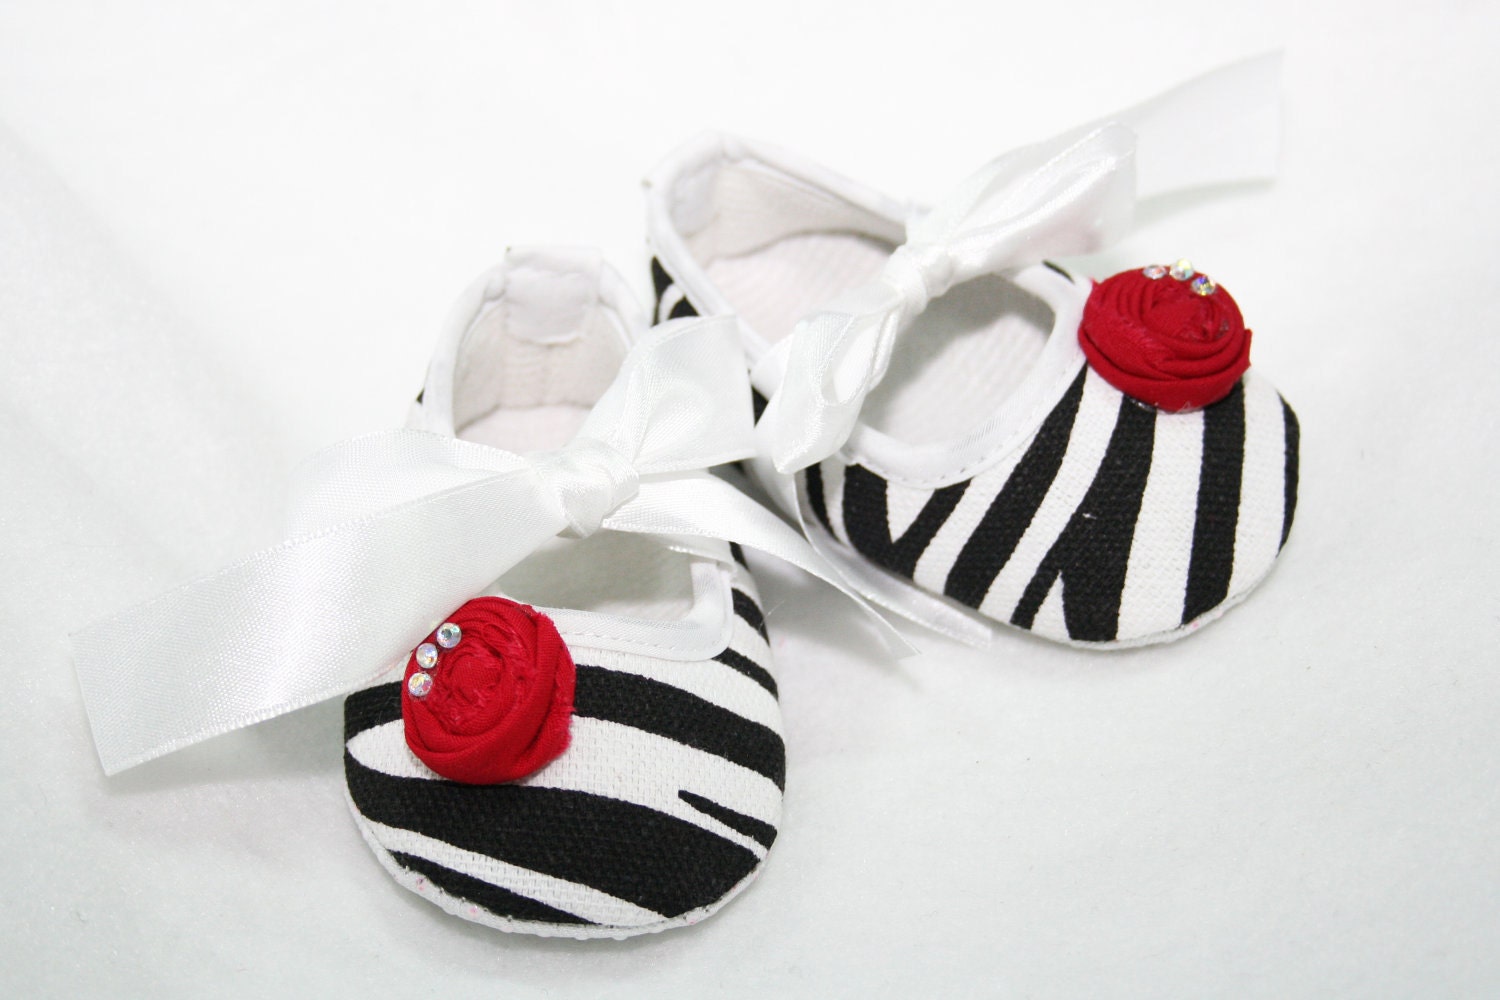 Zebra Print, Baby Shoes With Red Satin RosetteToes, Infant Crib Shoes, Ballet Inspired - pilycouture